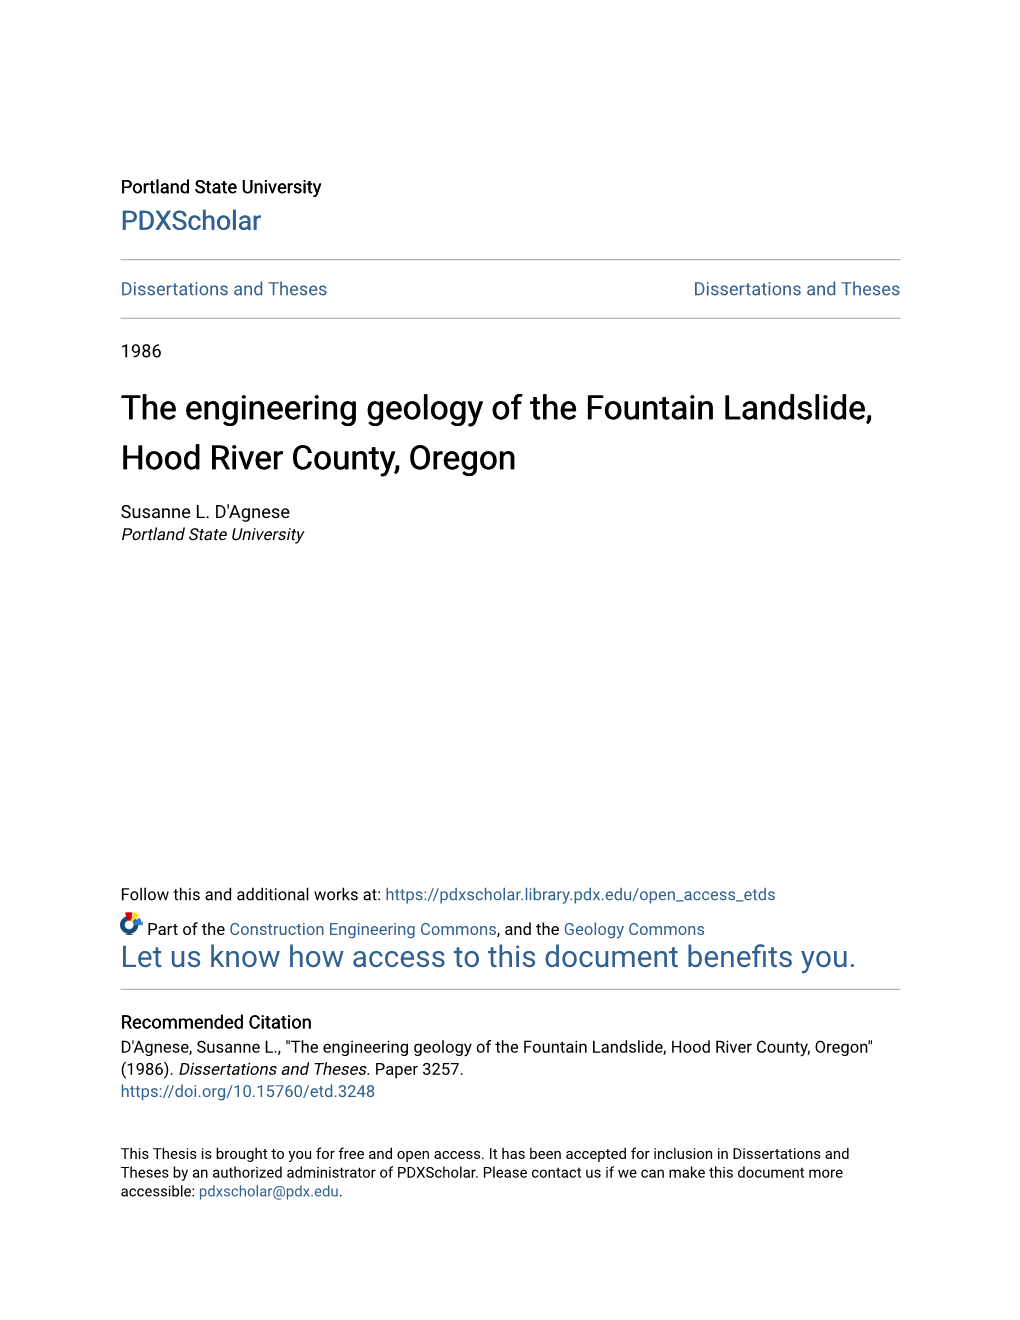 The Engineering Geology of the Fountain Landslide, Hood River County, Oregon